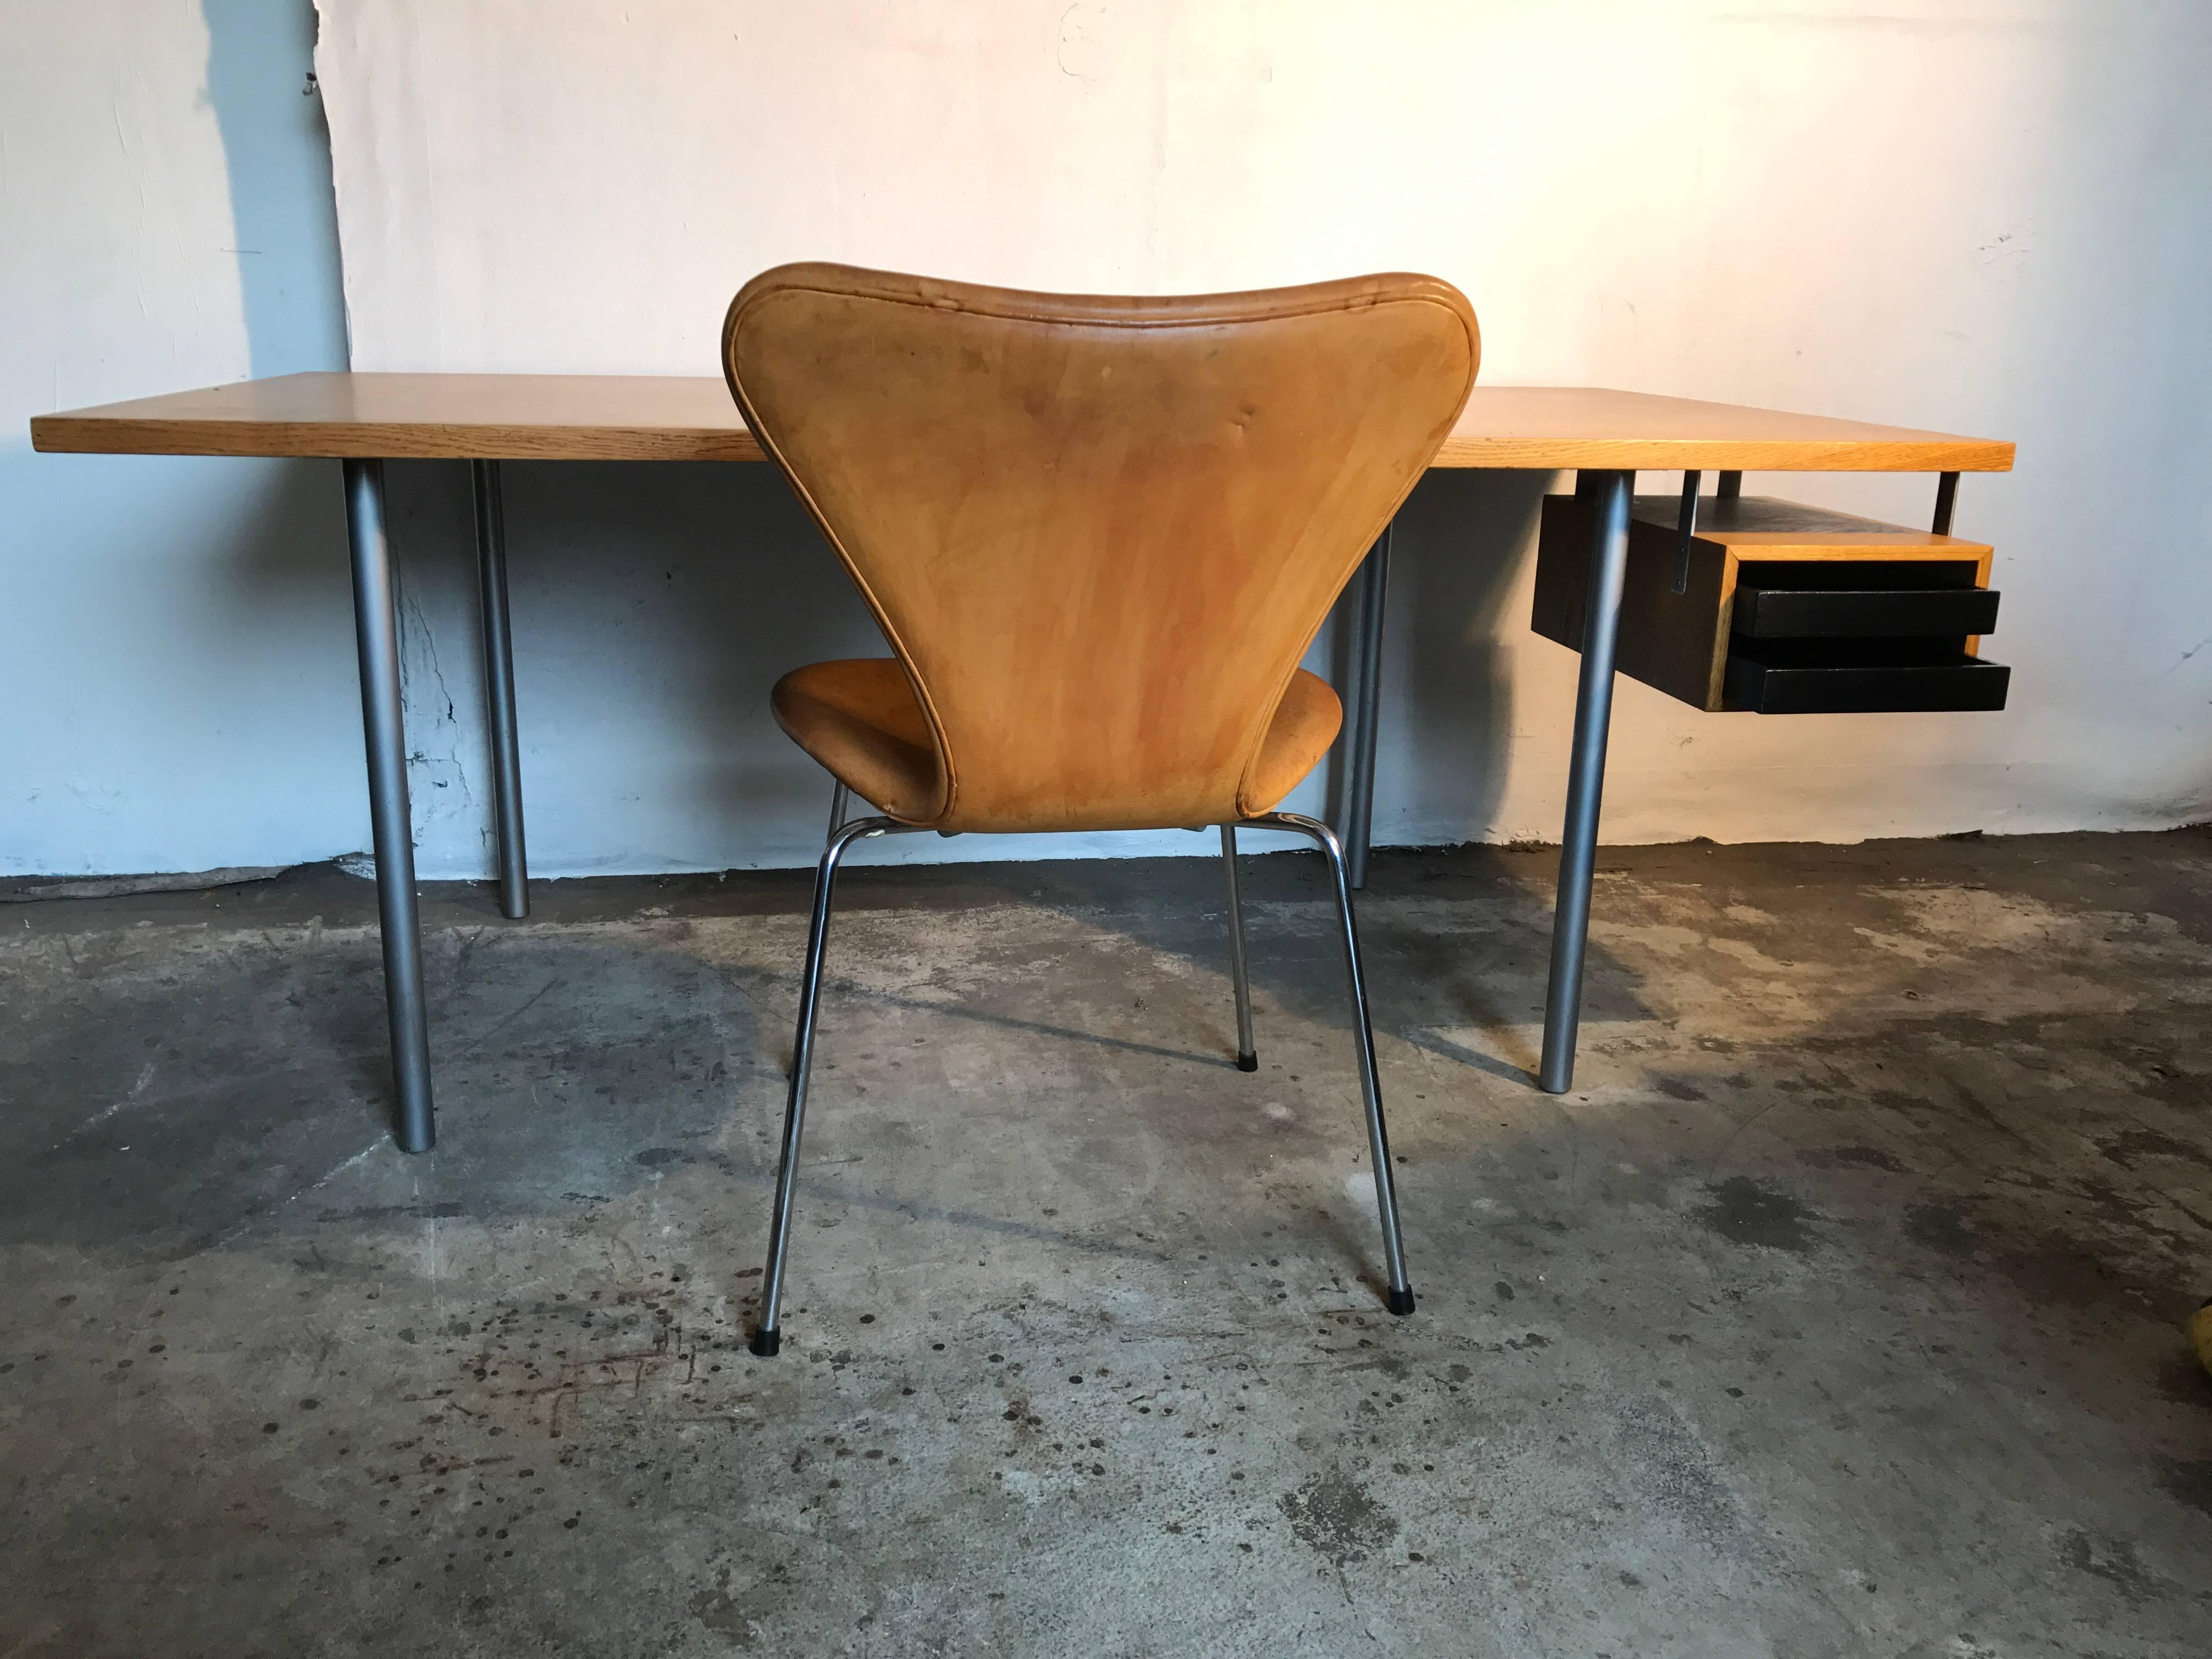 Very rare Poul Kjærholm custom-made desk from 1964. Desk top made of oakwood. Two black-varnished drawers and tubular steel legs. Stamped E.kold in few places.